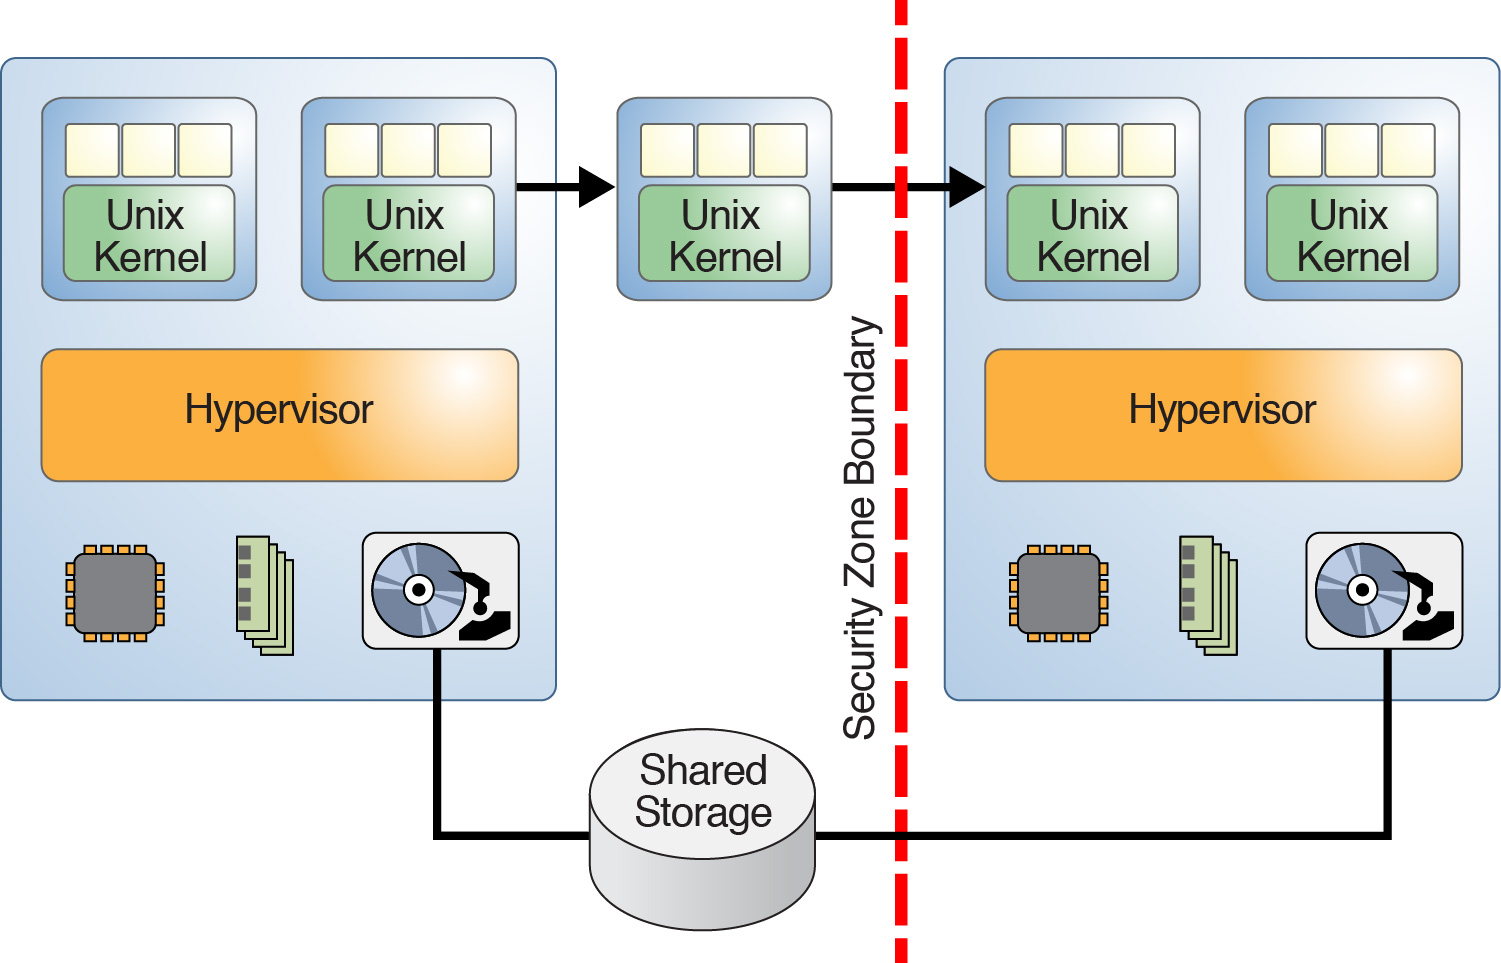 image:Graphic shows two virtualized systems divided by a security class boundary.